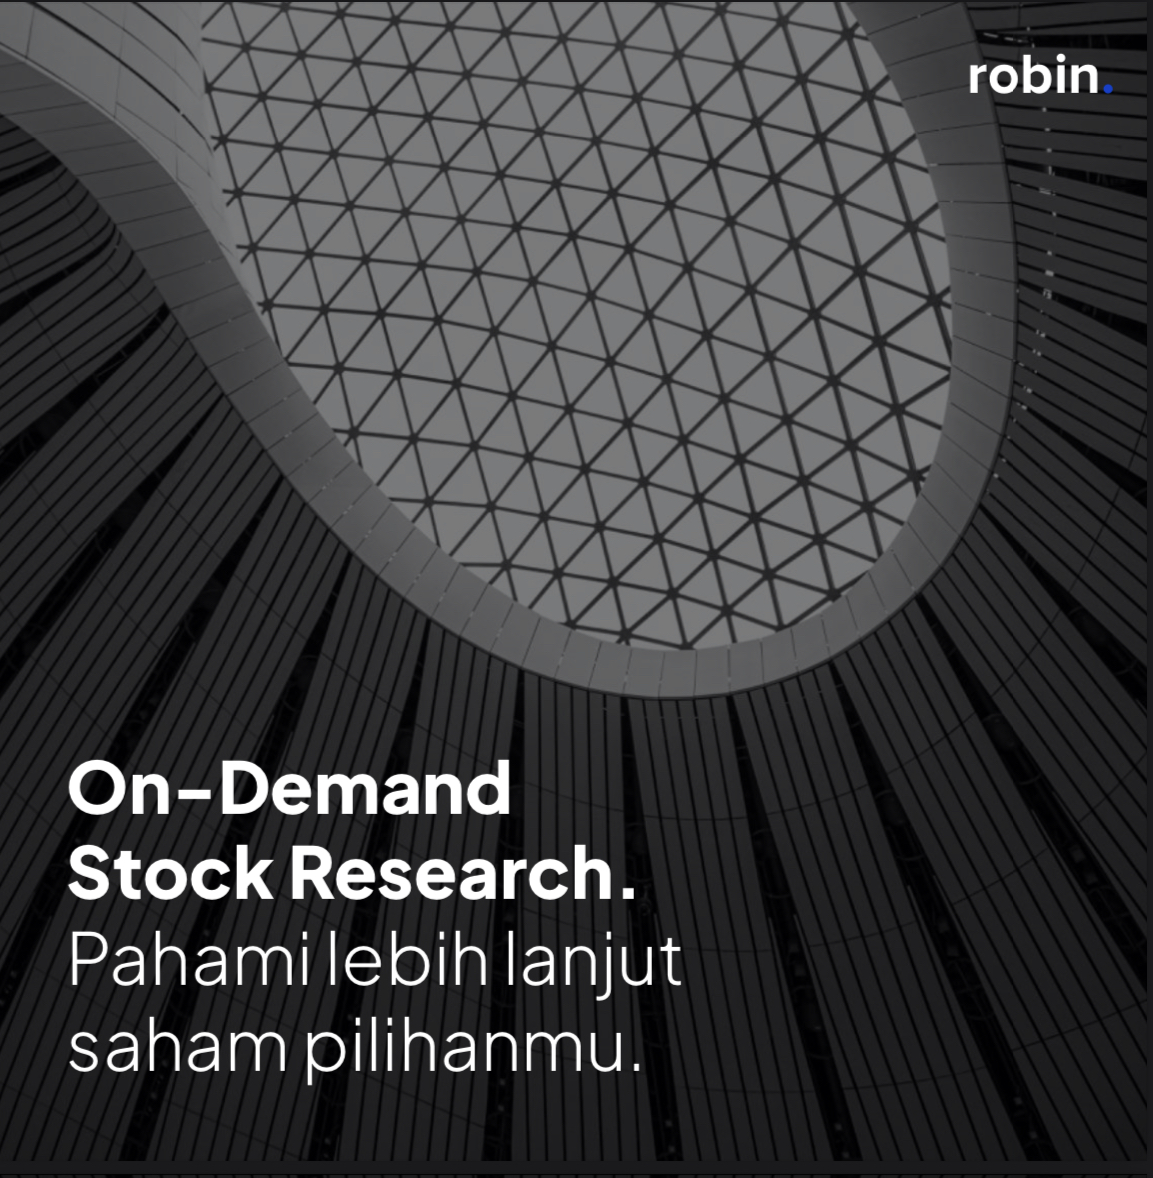 On-Demand Stock Research by Robin